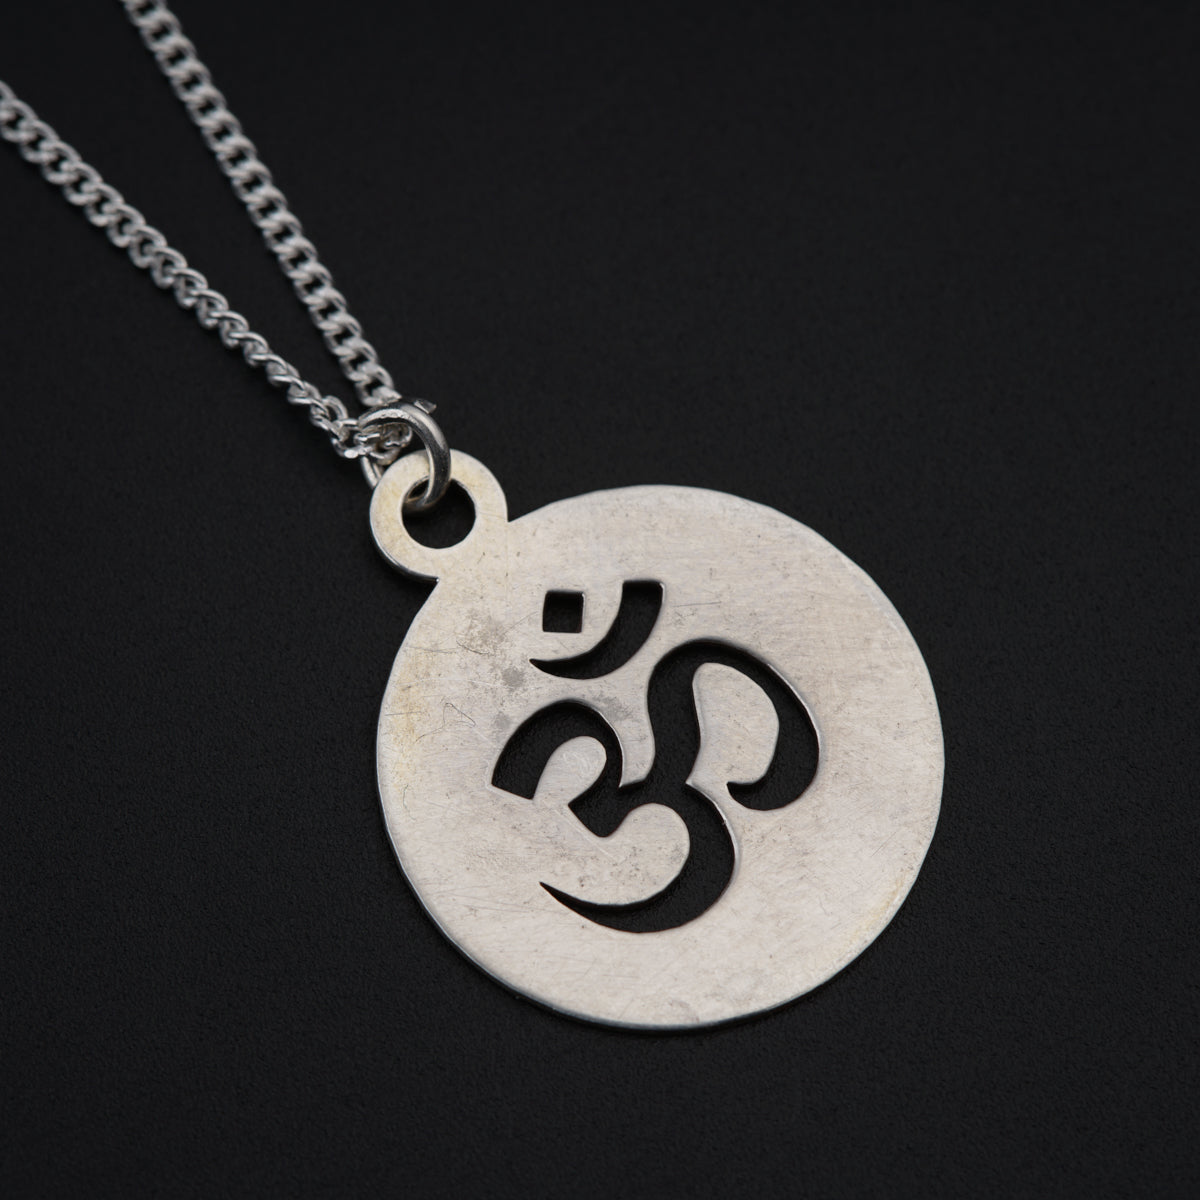 a silver necklace with a black omen symbol on it